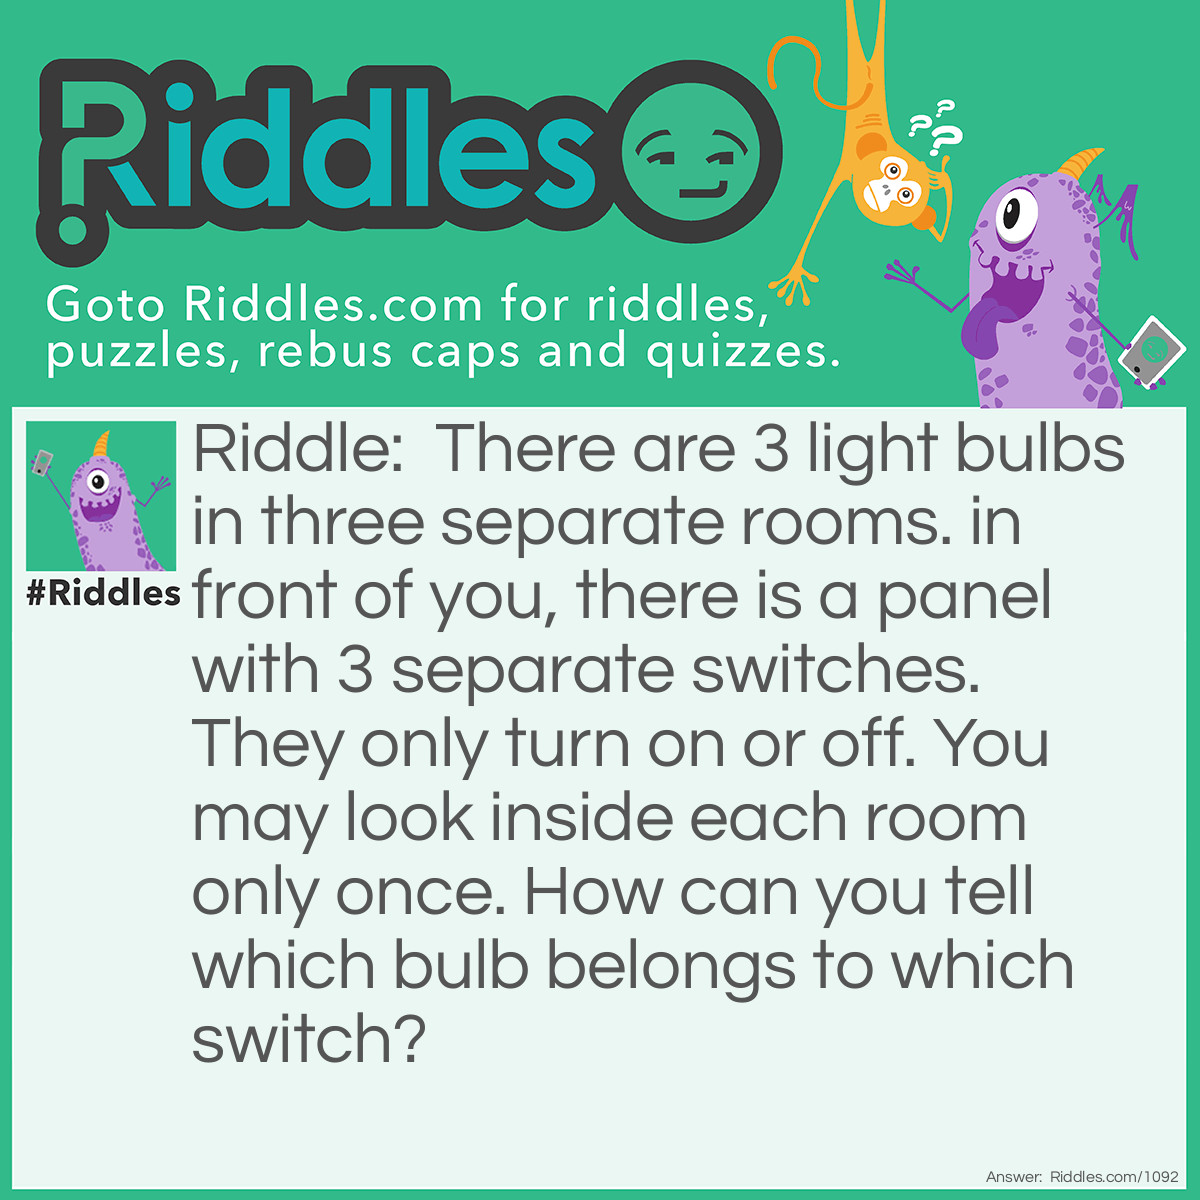 Riddle: There are 3 light bulbs in three separate rooms. in front of you, there is a panel with 3 separate switches. They only turn on or off. You may look inside each room only once. How can you tell which bulb belongs to which switch? Answer: You turn on any two switches, leave them for a few minutes, and turn one switch off. You enter each room only once. you know that the lightbulb that is lit belongs to the switch that was left on, the bulb that is off, but hot, belongs to the switch you turned off, and the cold bulb belongs to the switch you never touched.